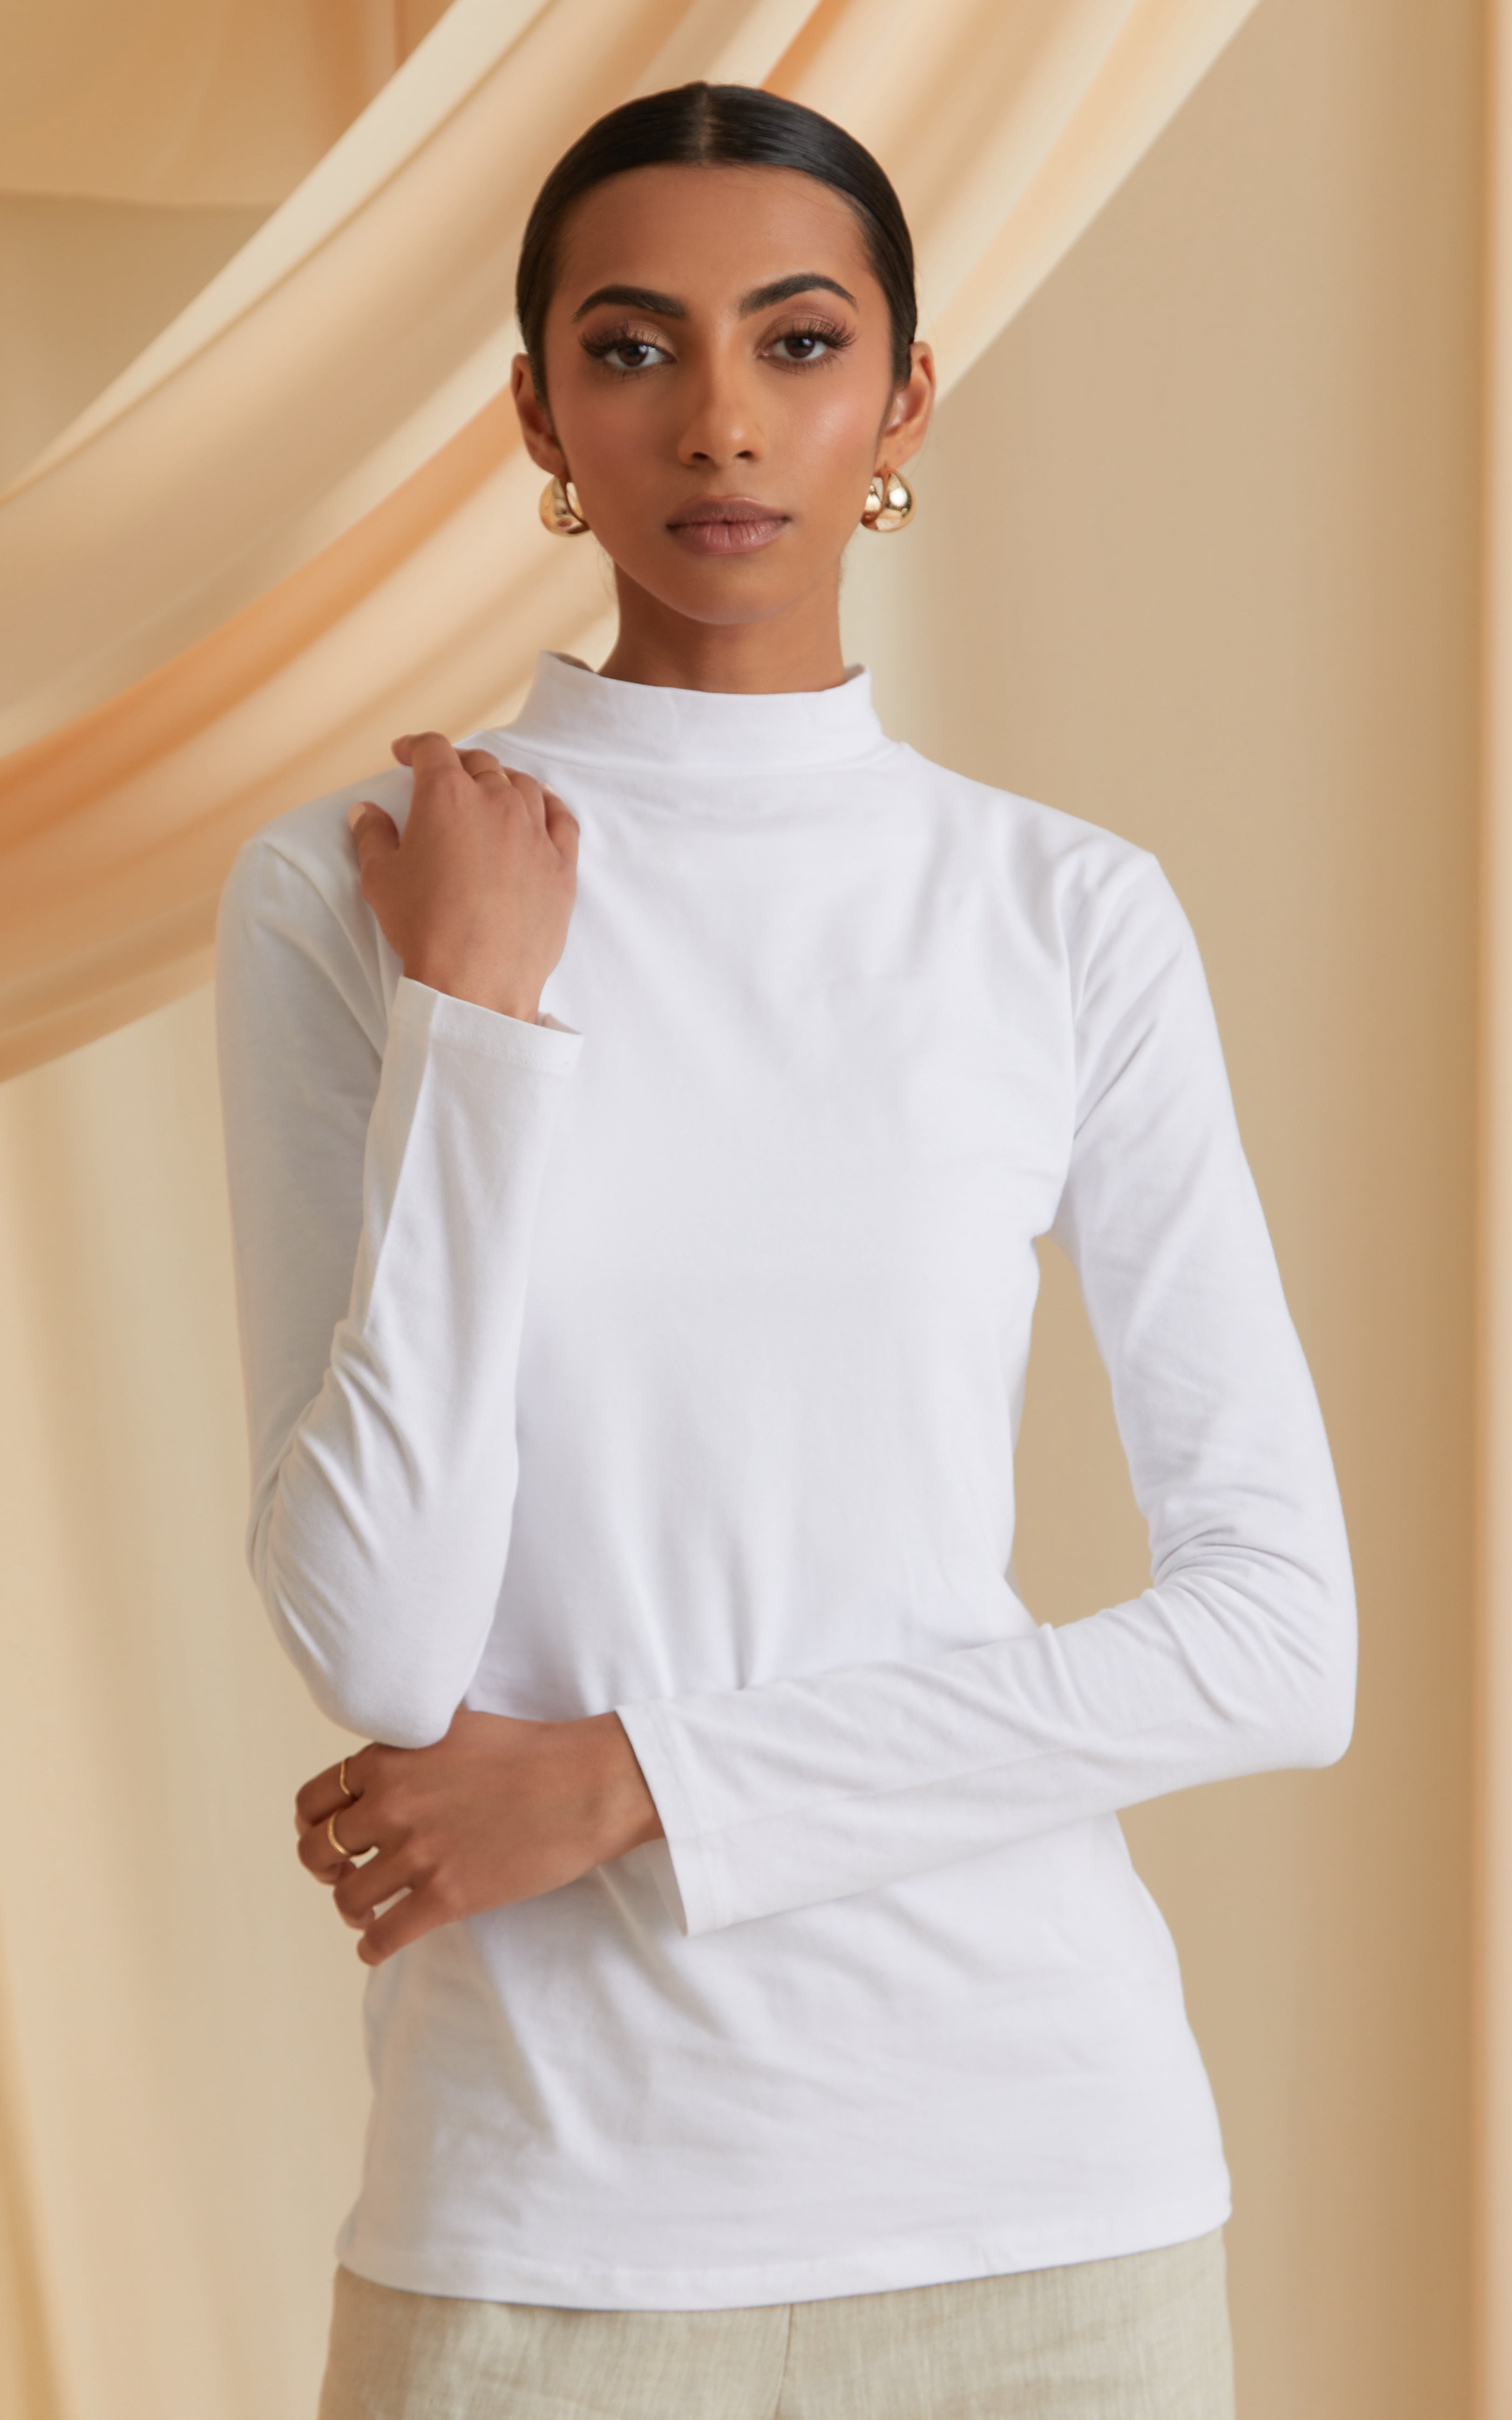 High Neck Long Sleeve Top in White $14 Free Shipping! | CULTURE Hijab